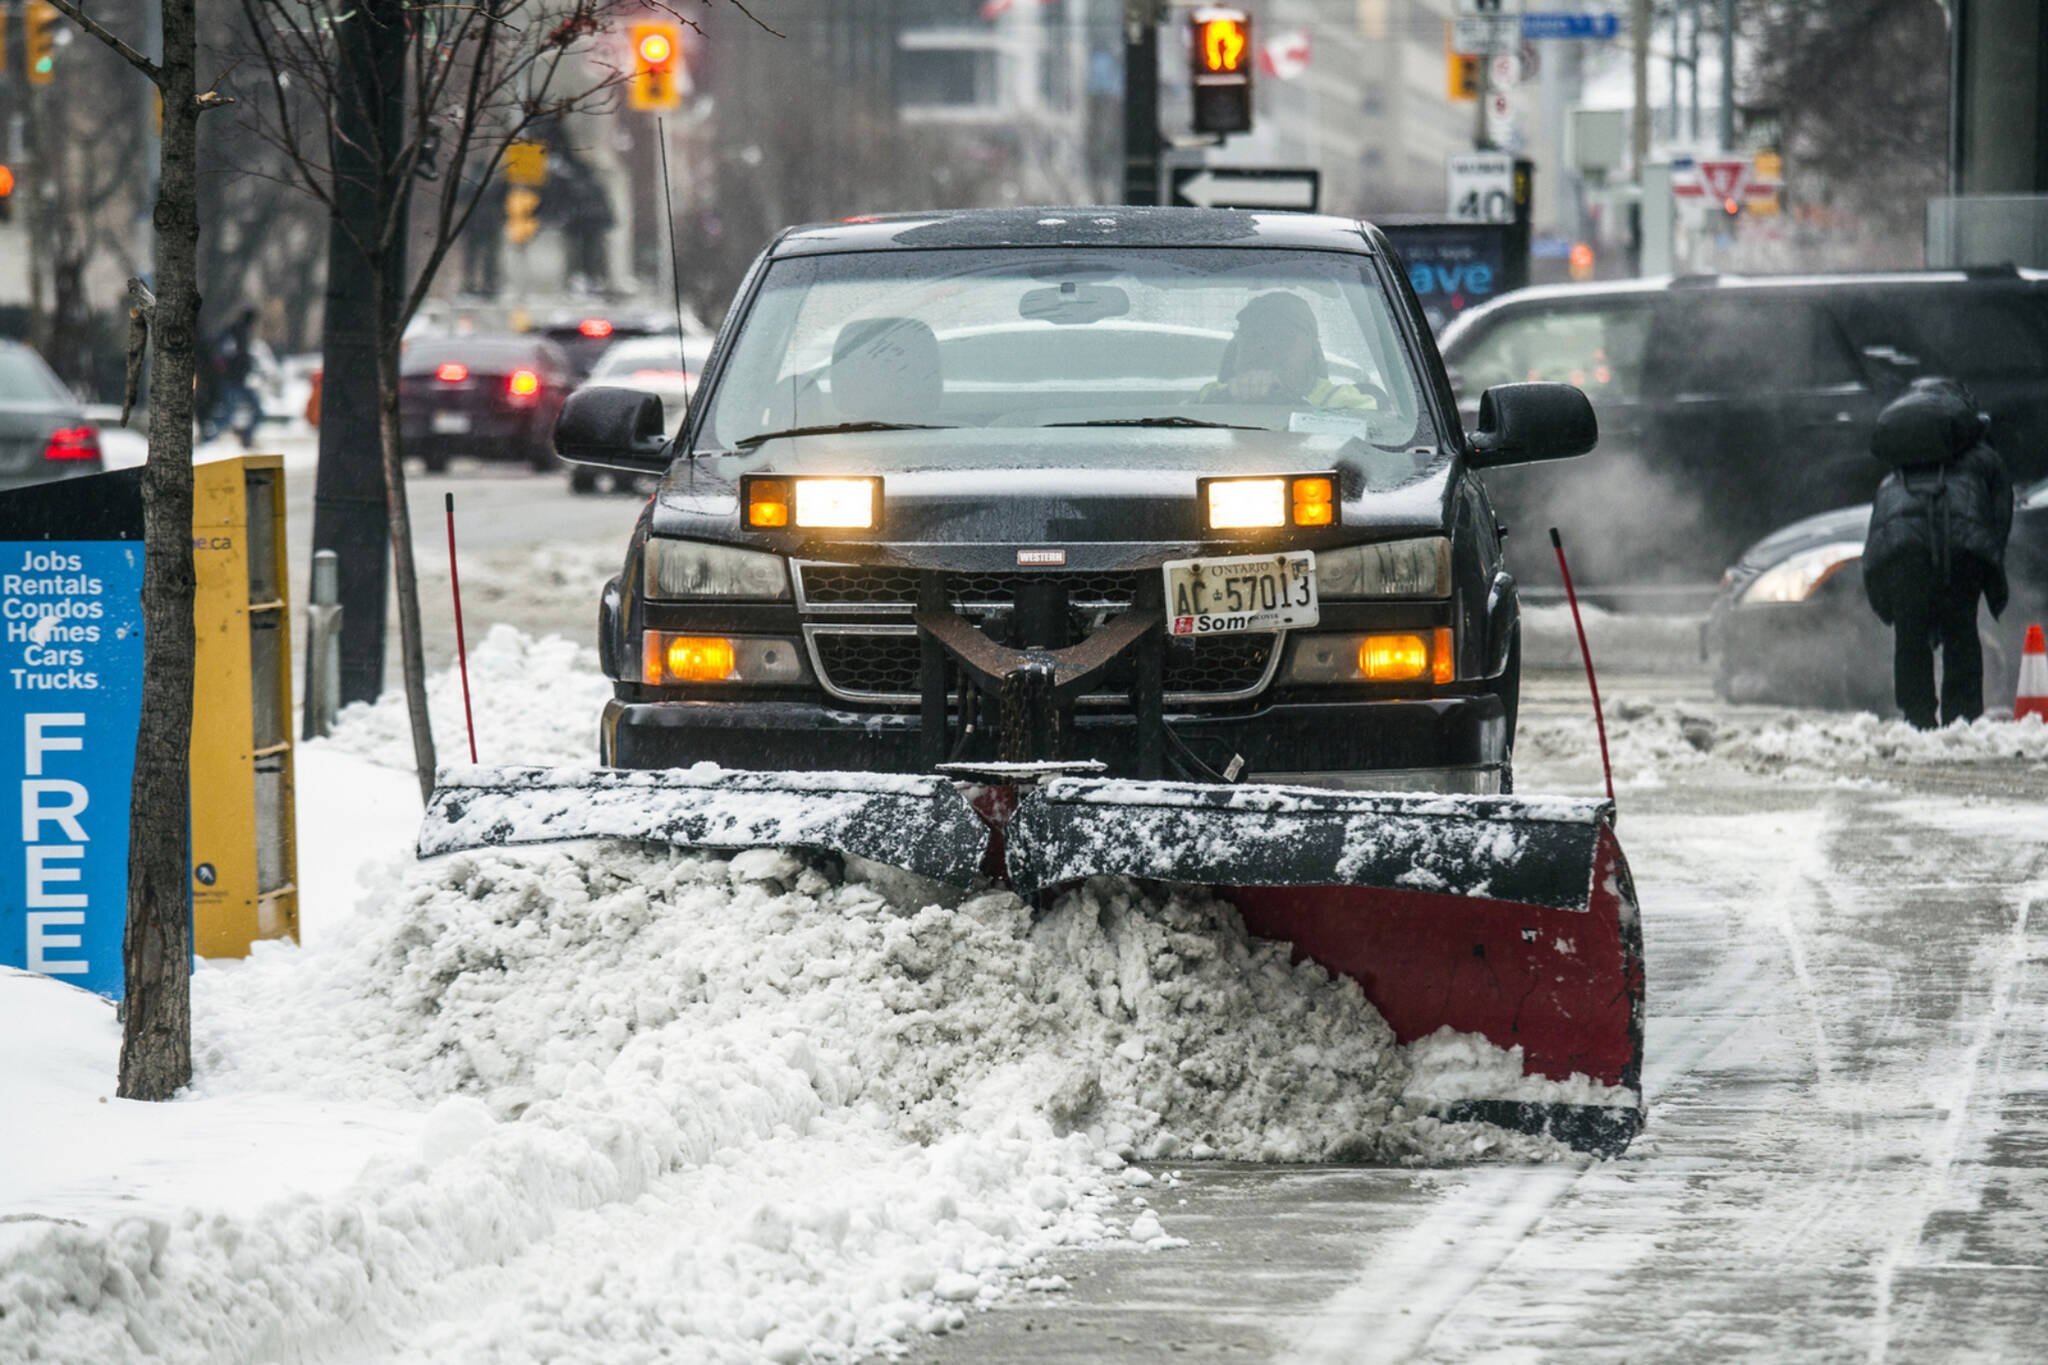 Toronto to start towing cars if they're in the way of snow plows